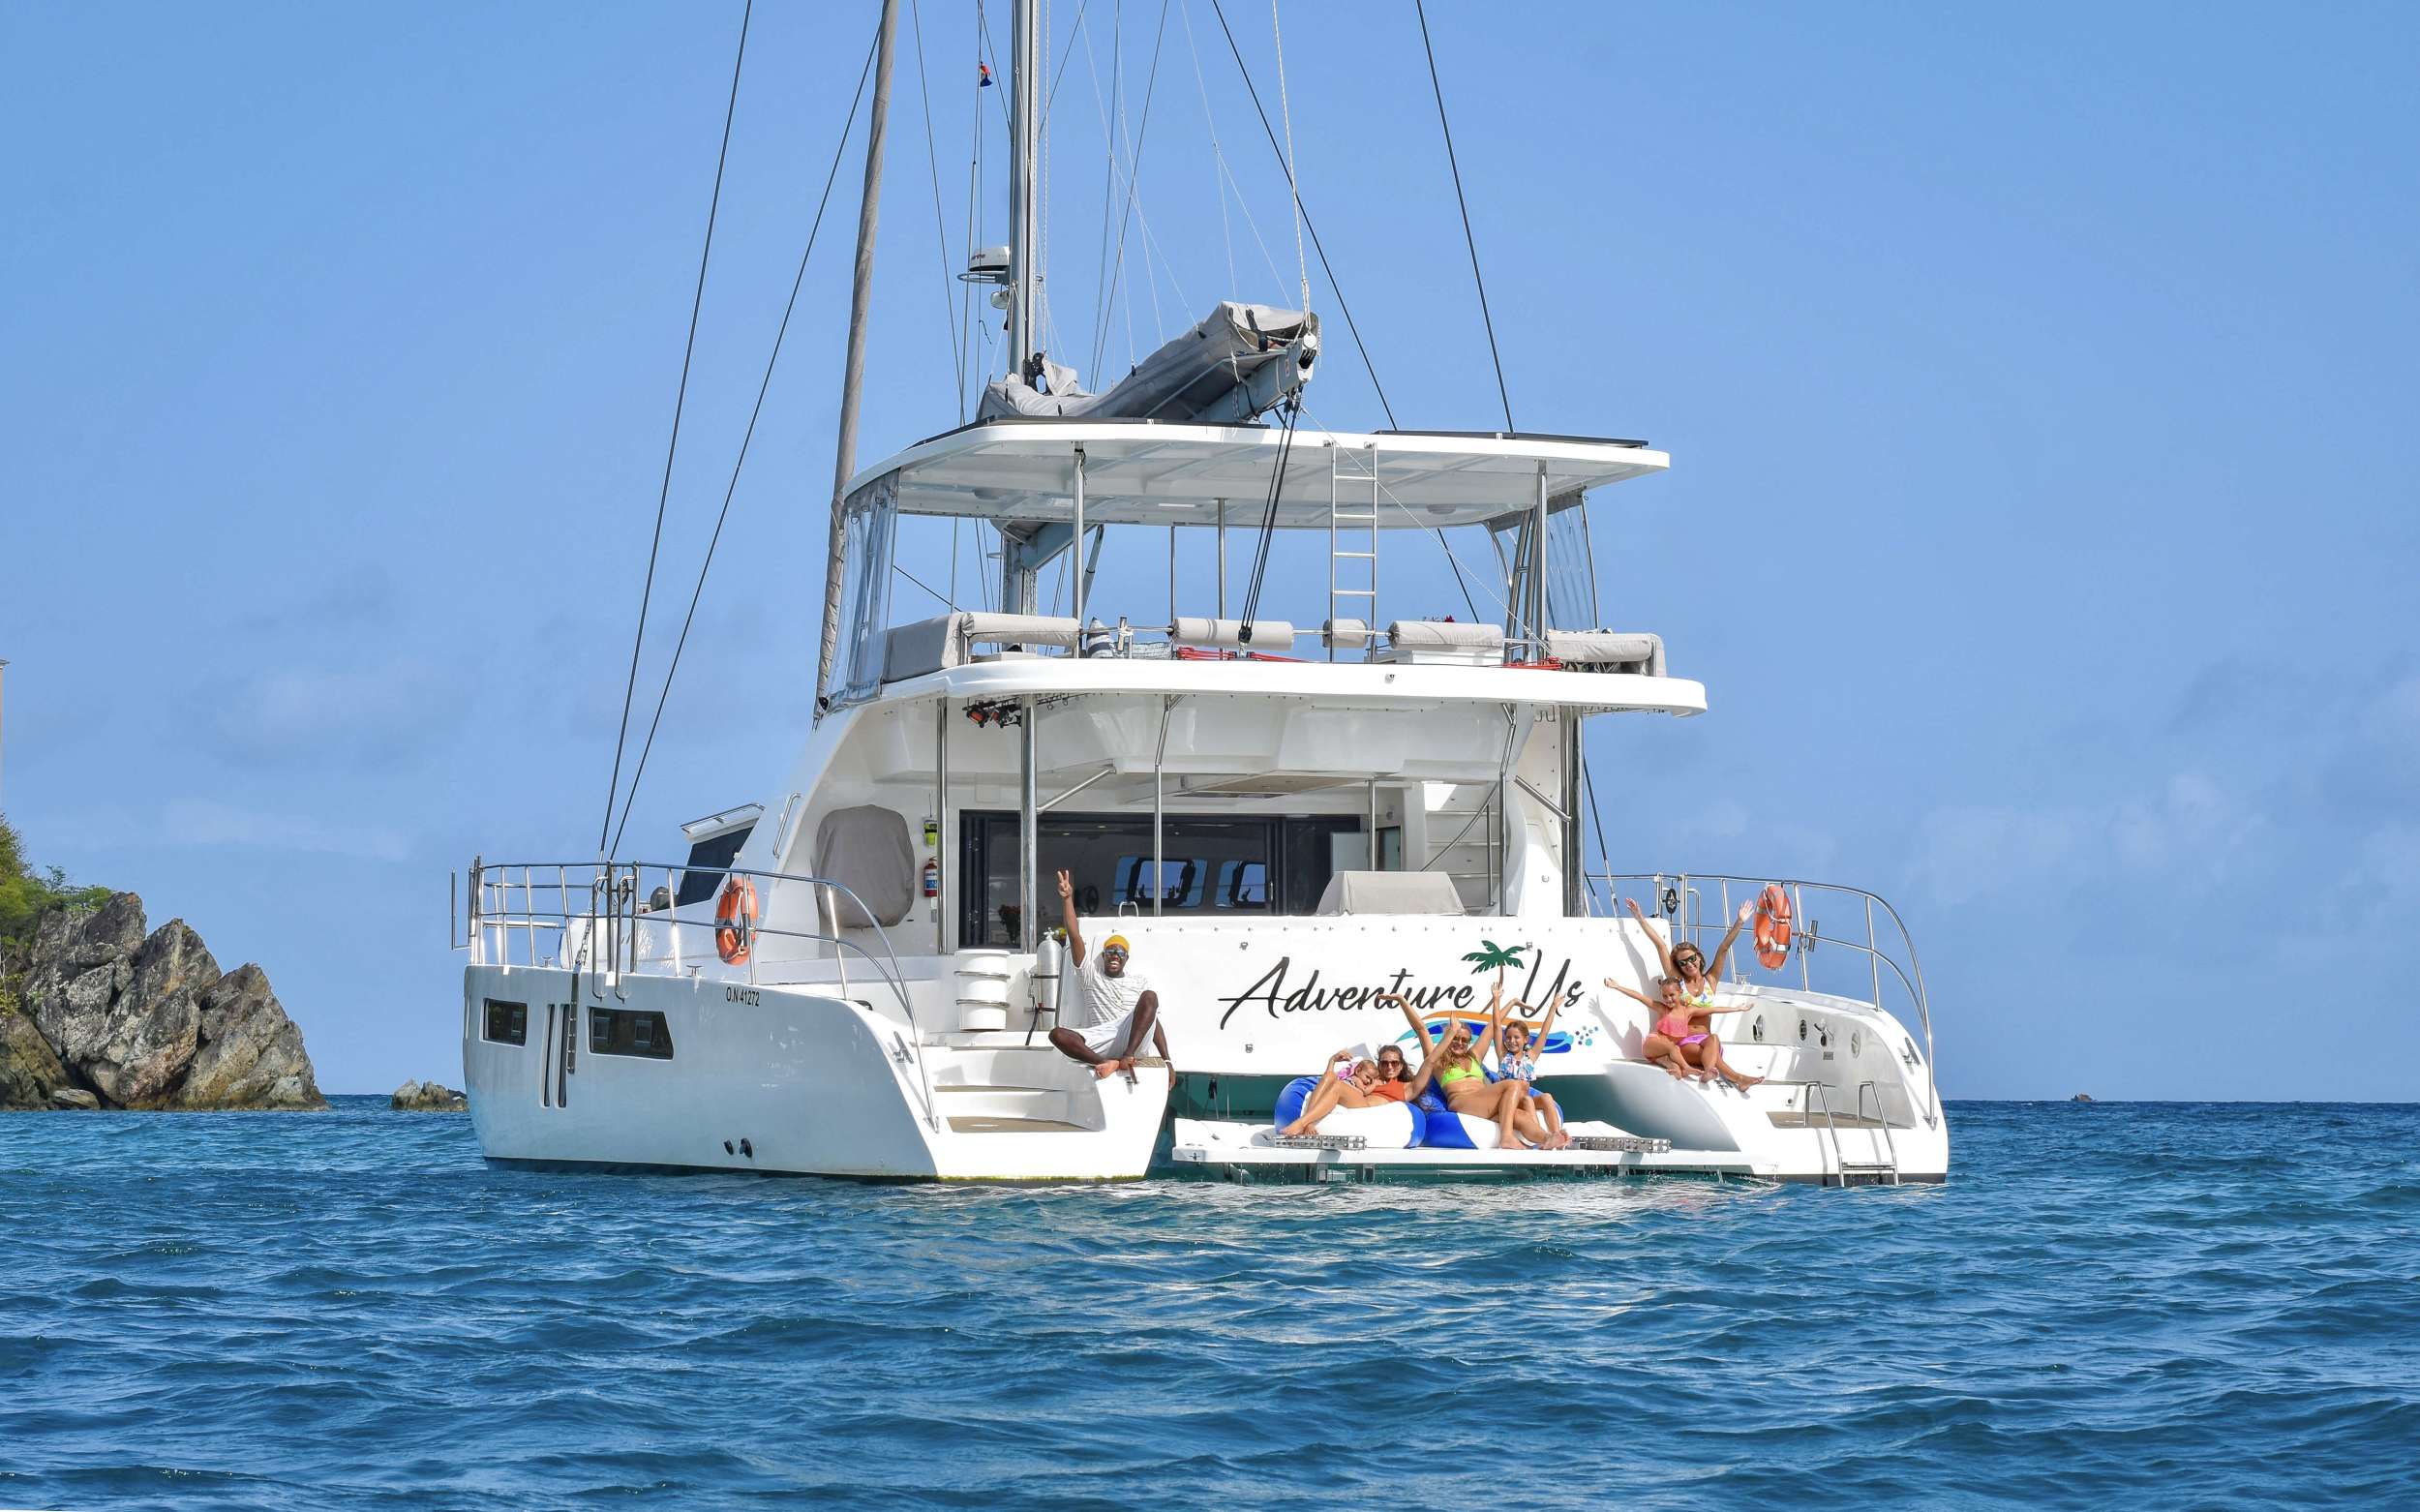 ADVENTURE US Yacht Charter - Ritzy Charters